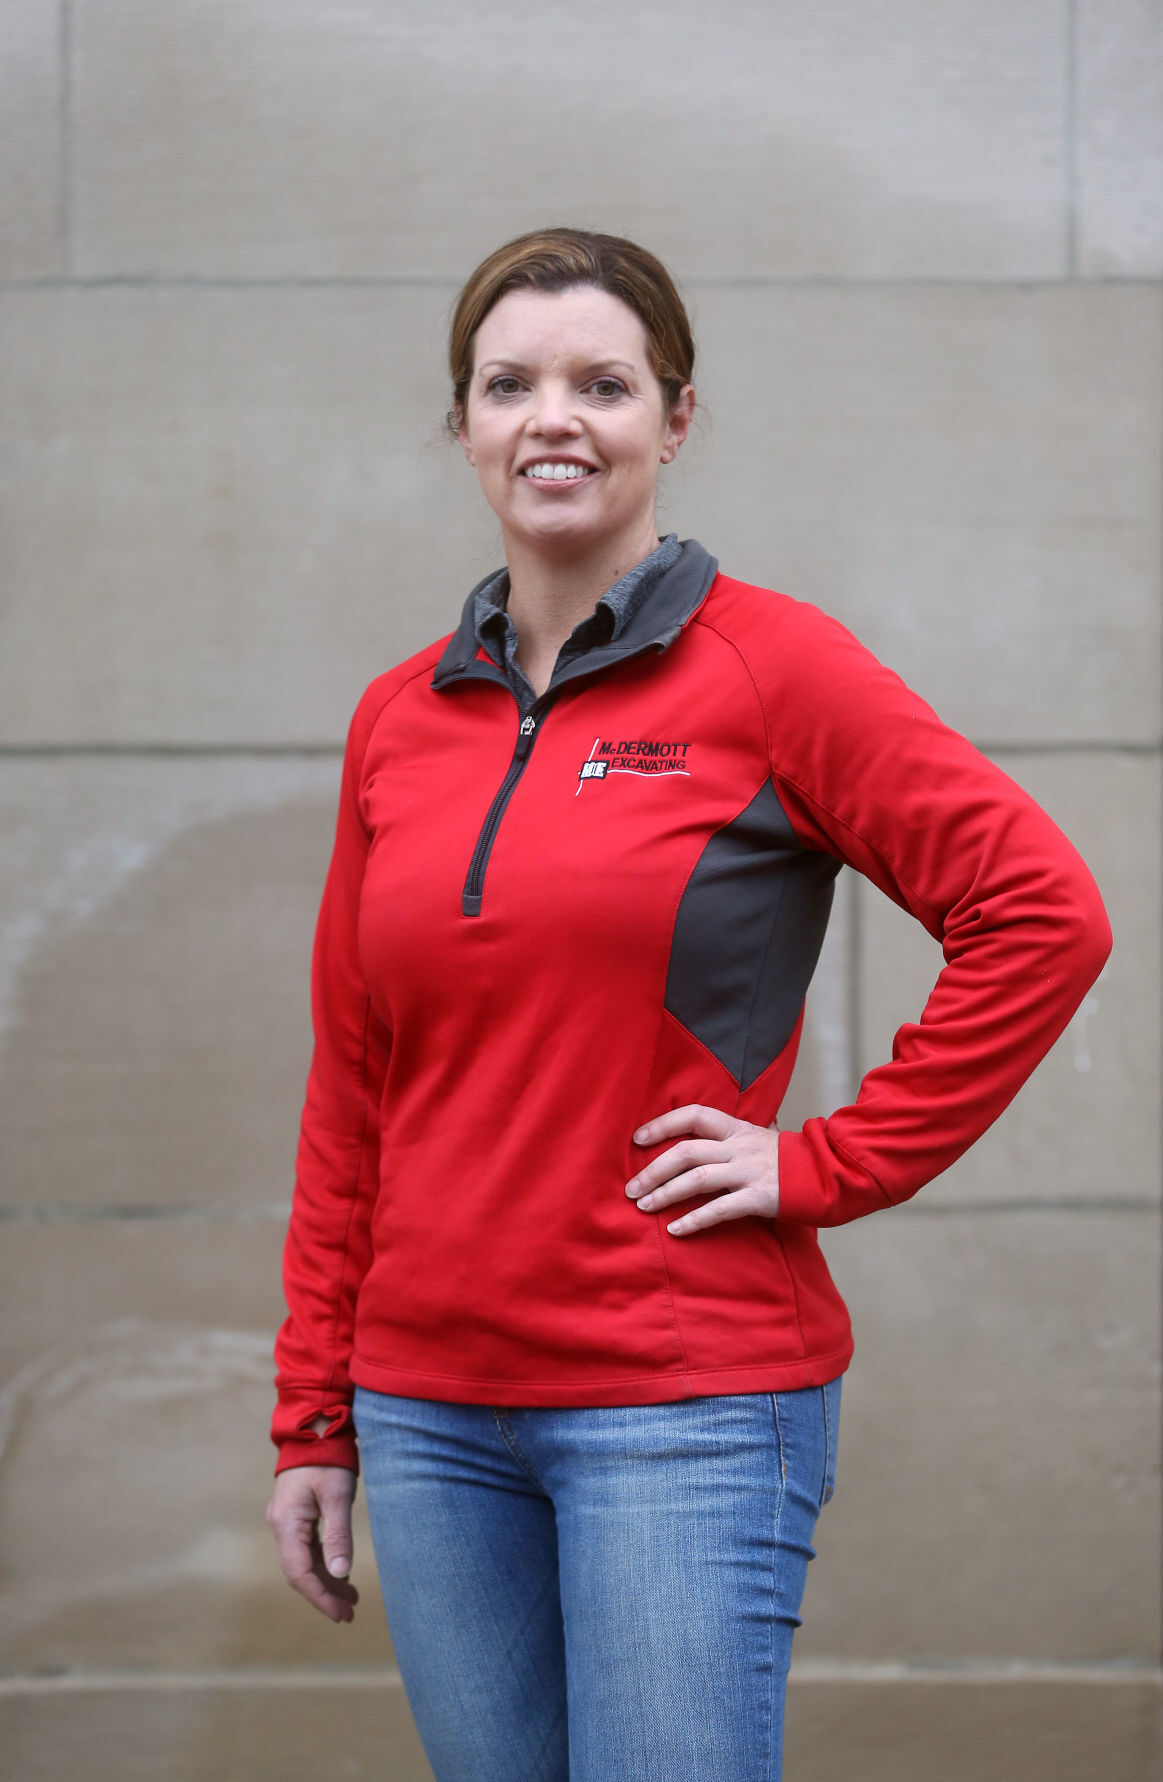 Tara Duggan is the president and owner of McDermott Excavating.  PHOTO CREDIT: Jessica Reilly